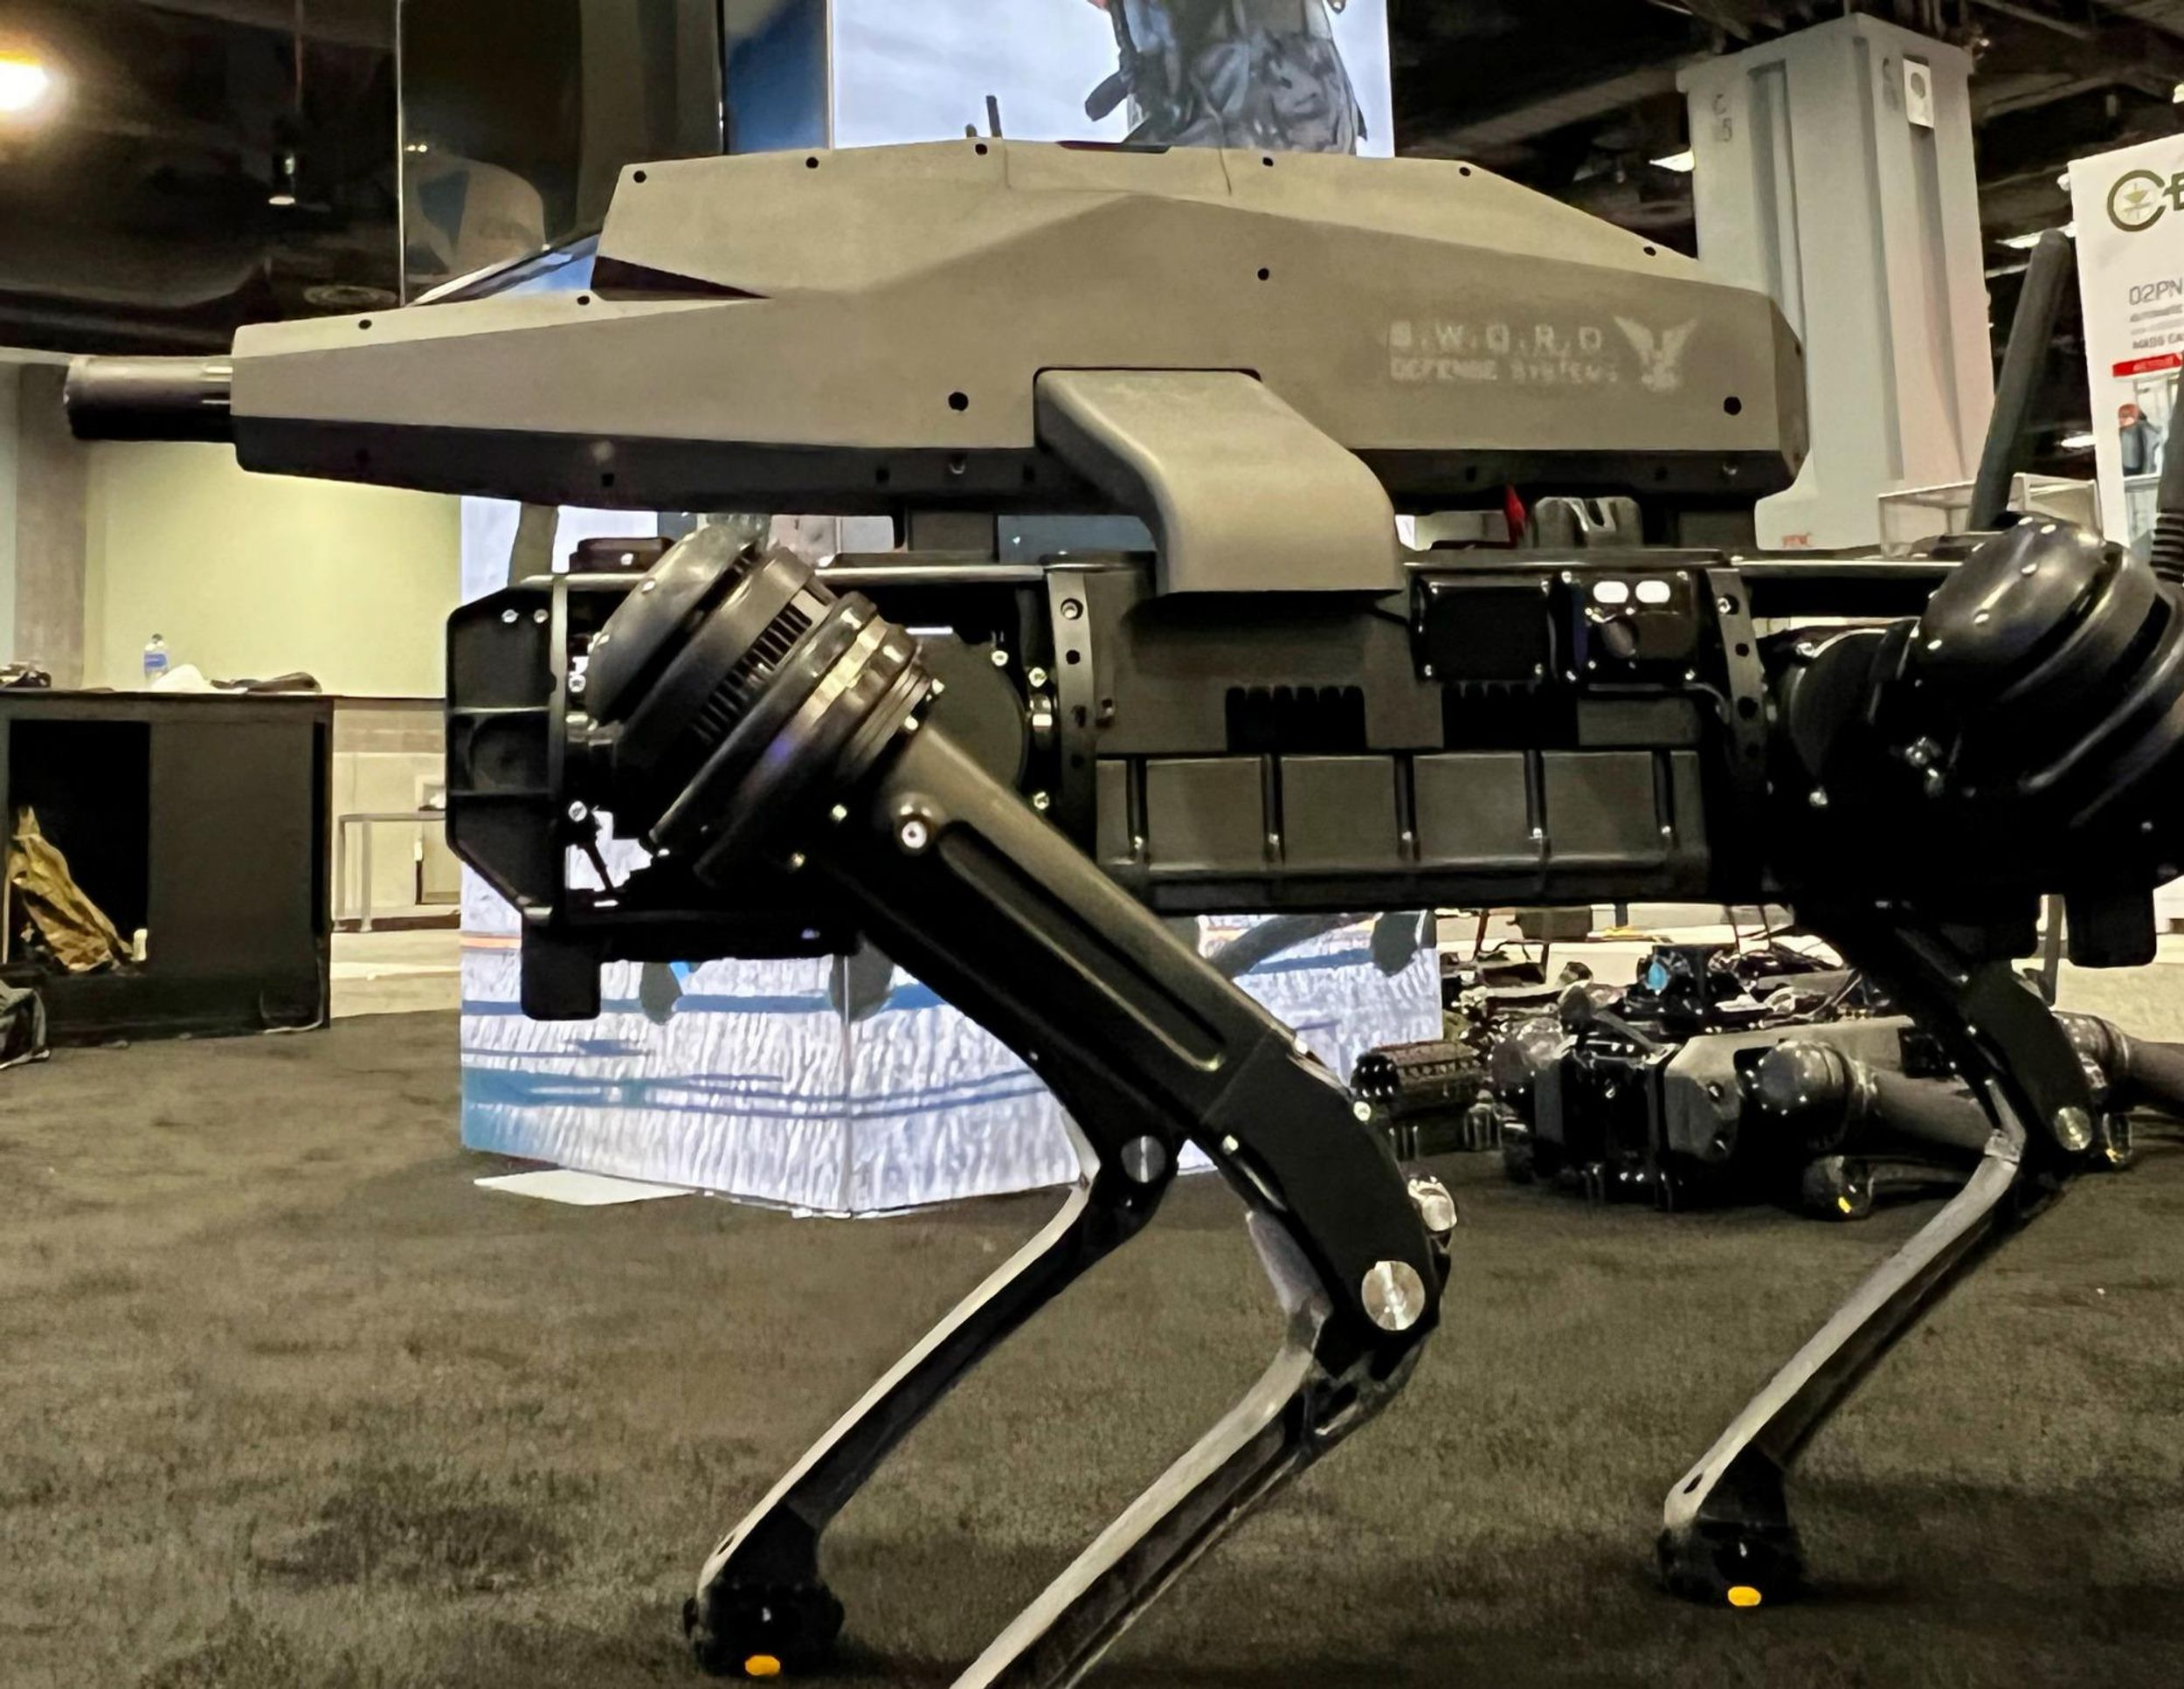 A black quadrupedal robot with a futuristic rifle on its back stands in an exhibition hall